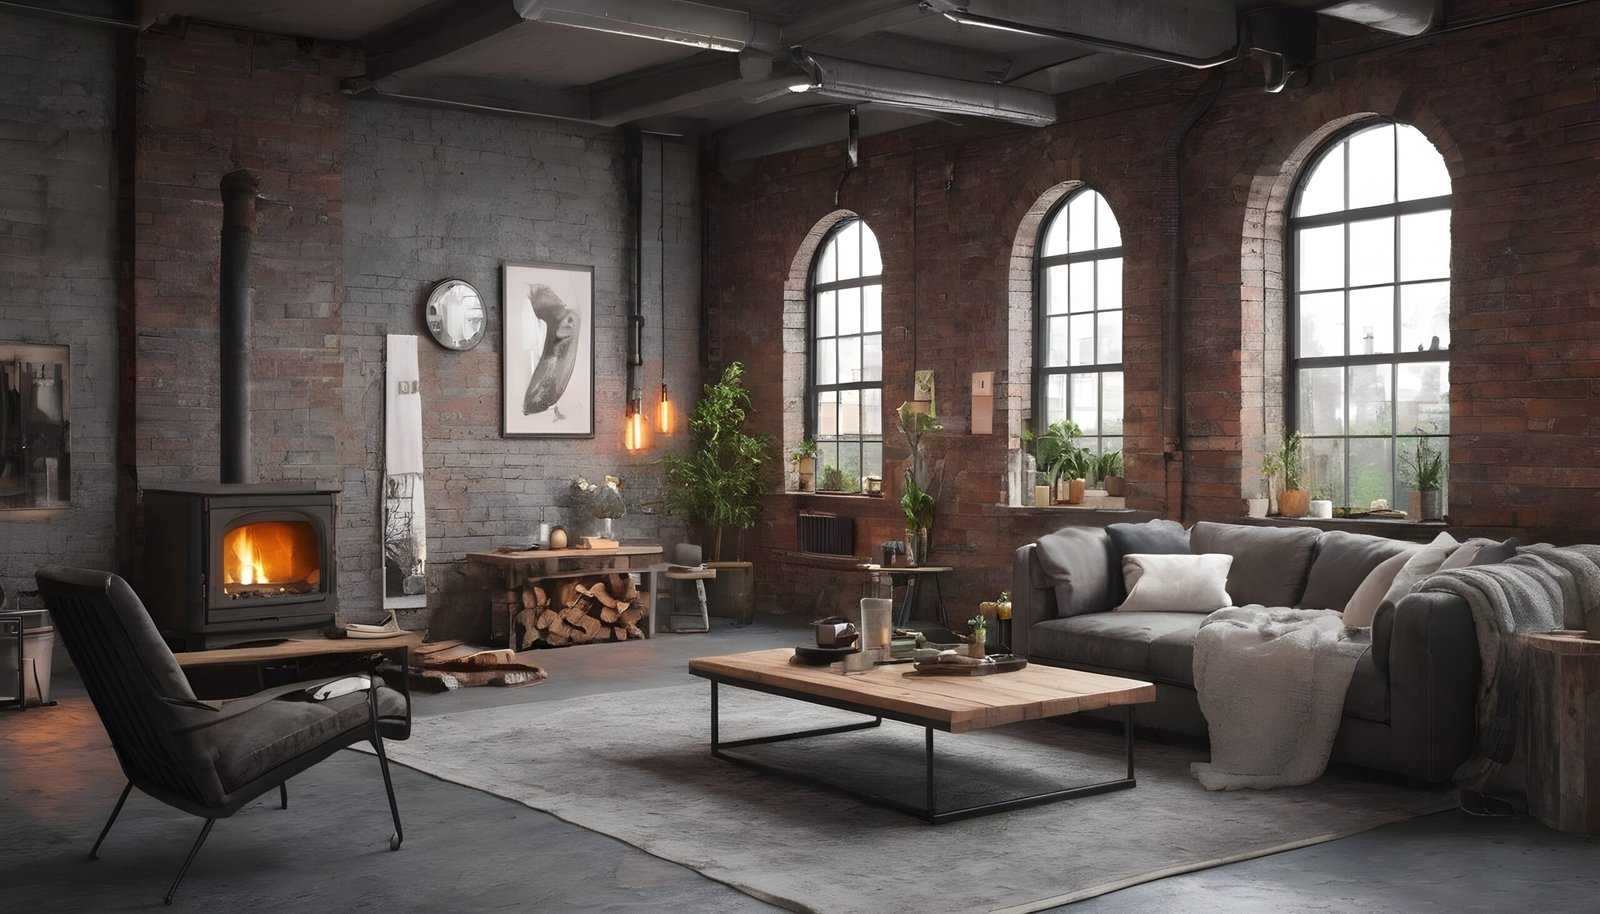 Industrial living room with exposed bricks and big windows.